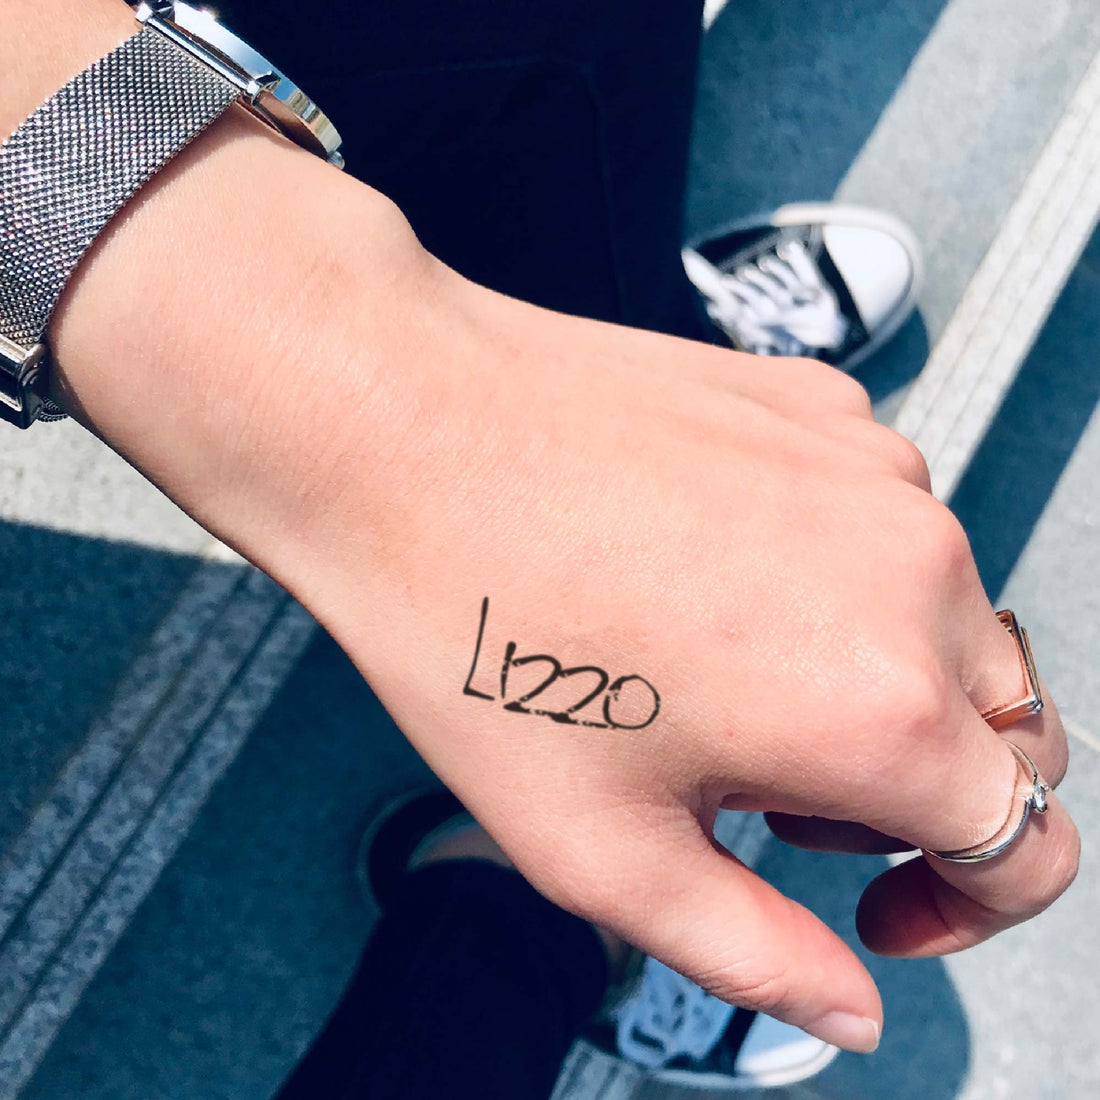 Lizzo custom temporary tattoo sticker design idea inspiration meanings removal arm wrist hand words font name signature calligraphy lyrics tour concert outfits merch accessory gift souvenir costumes wear dress up code